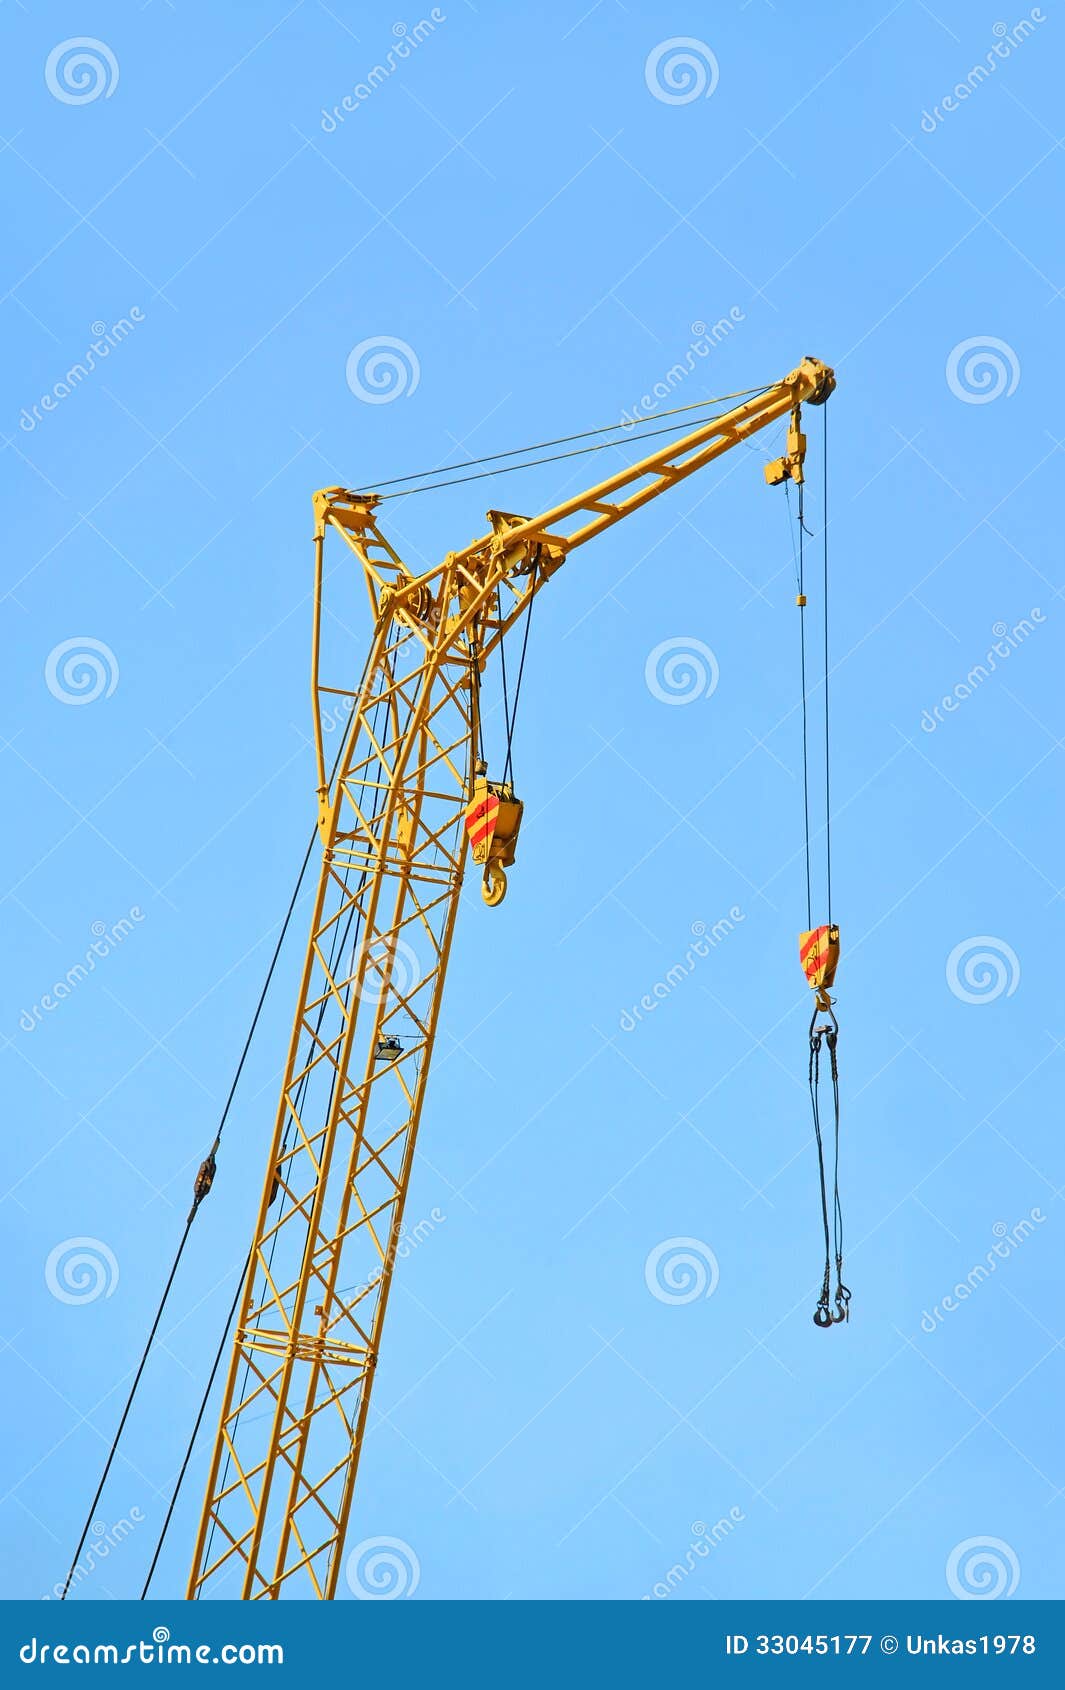 Mobile tower crane stock image. Image of site, loading - 33045177